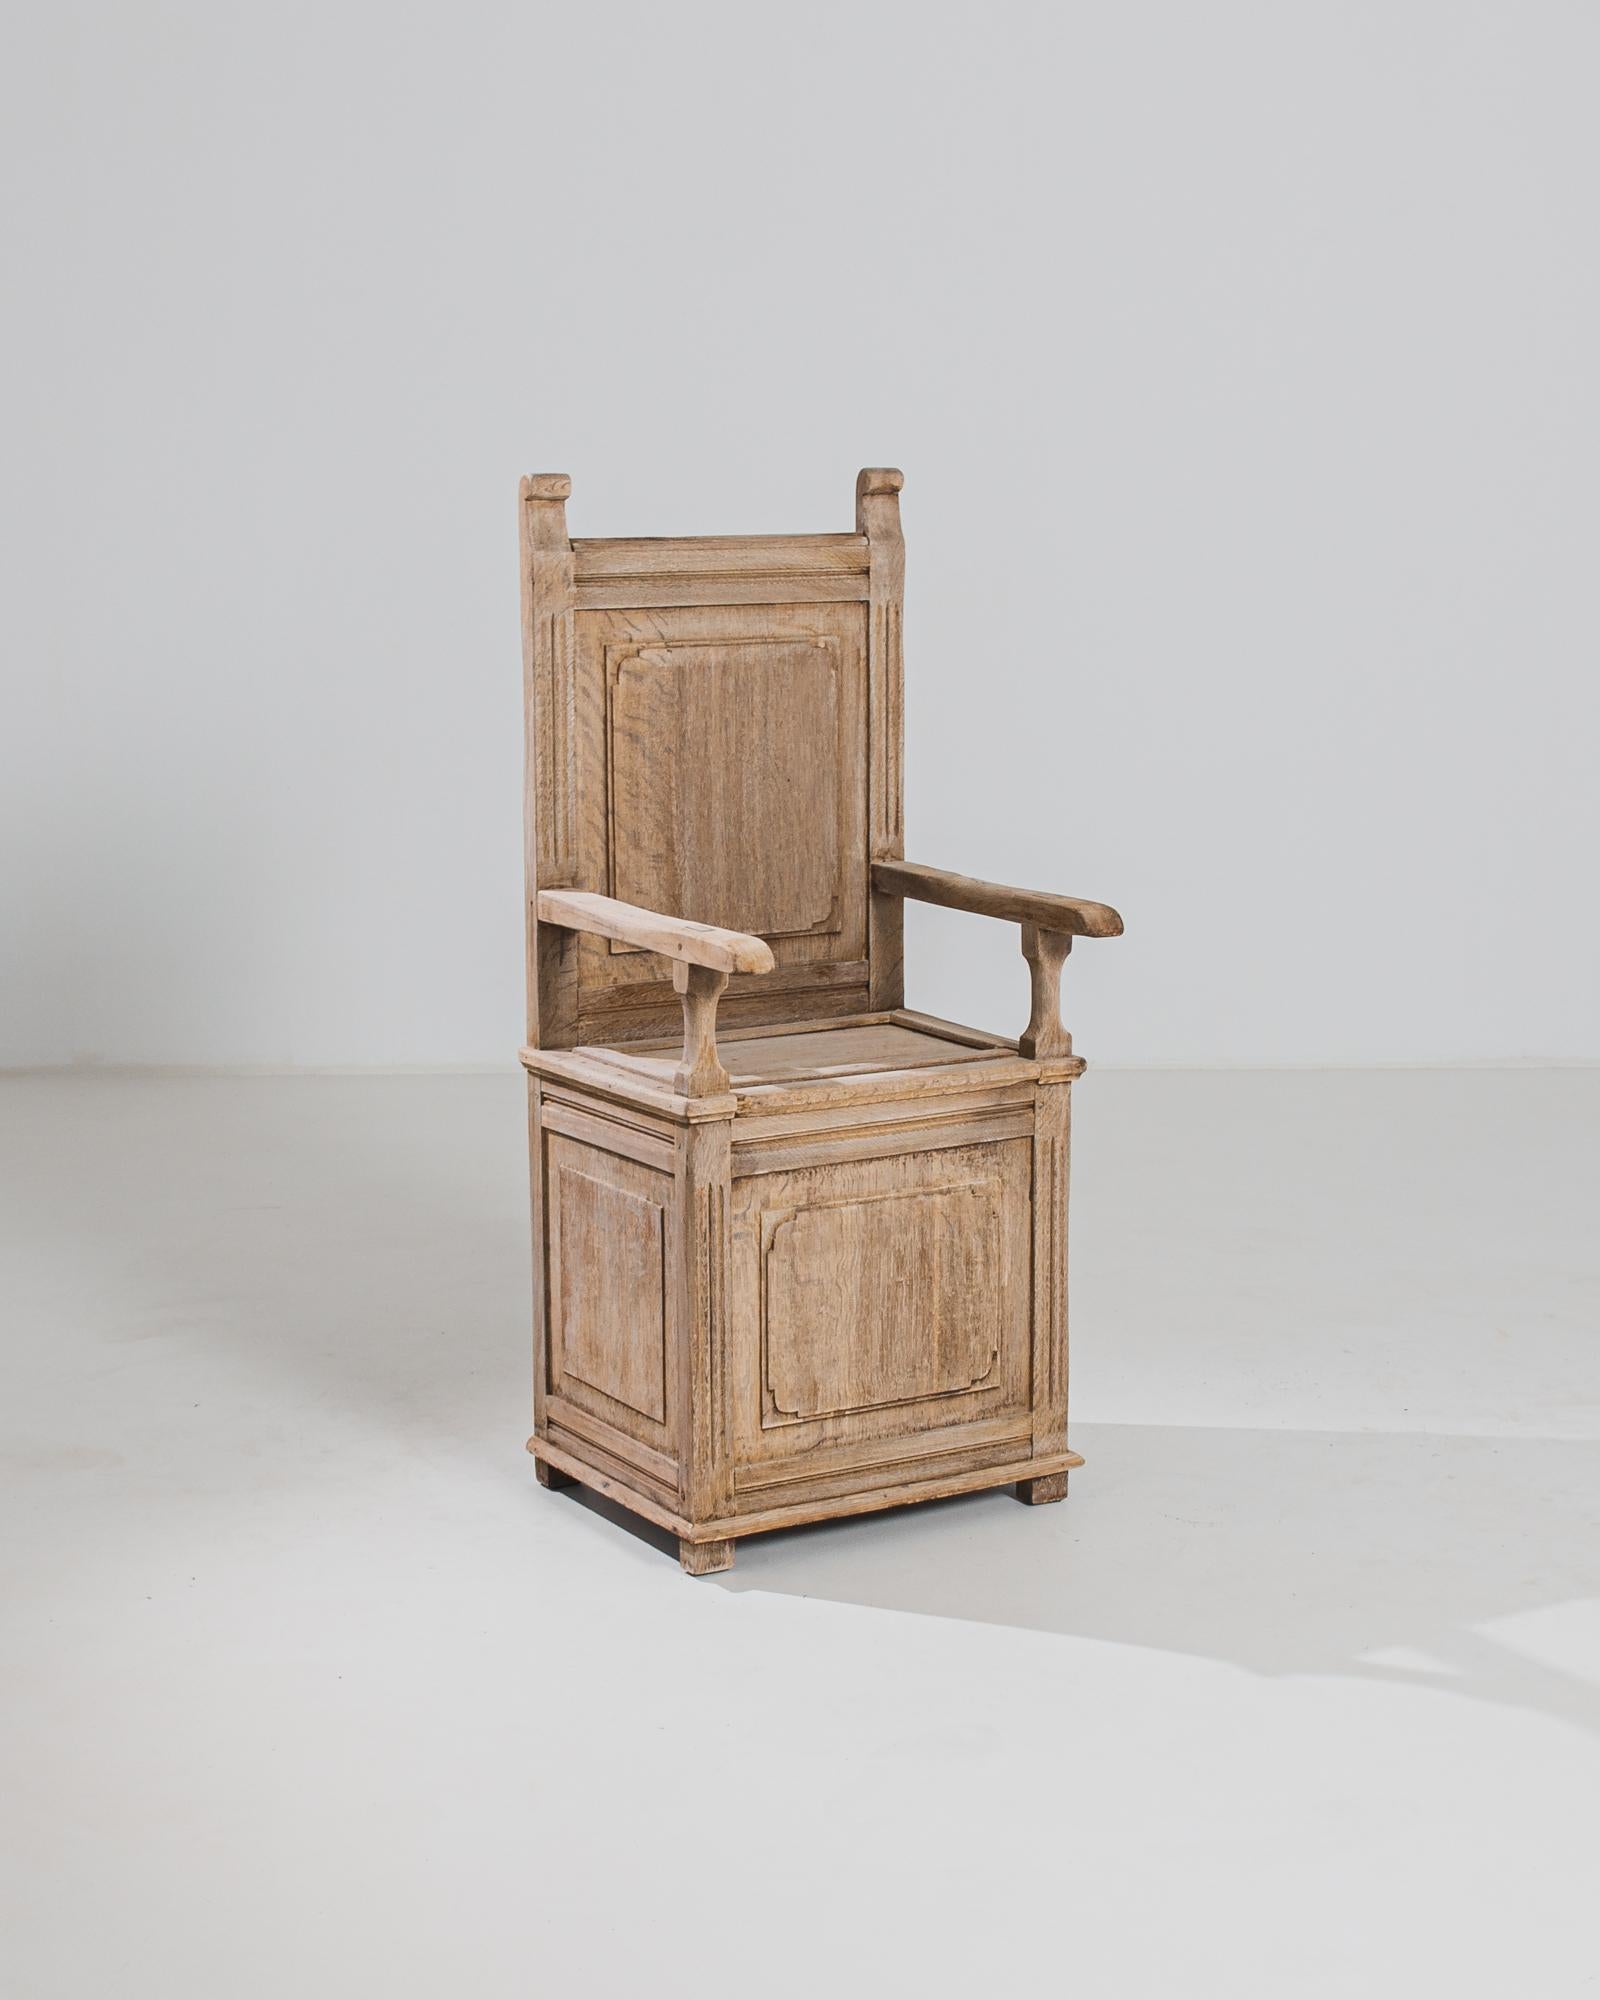 Made in Belgium, this antique bleached oak armchair offers a stately and dignified presence with its box seat, upright back, and horizontal armrests. Alongside its rustic tone, the subtle curves on the stiles and molding soften its rectilinear